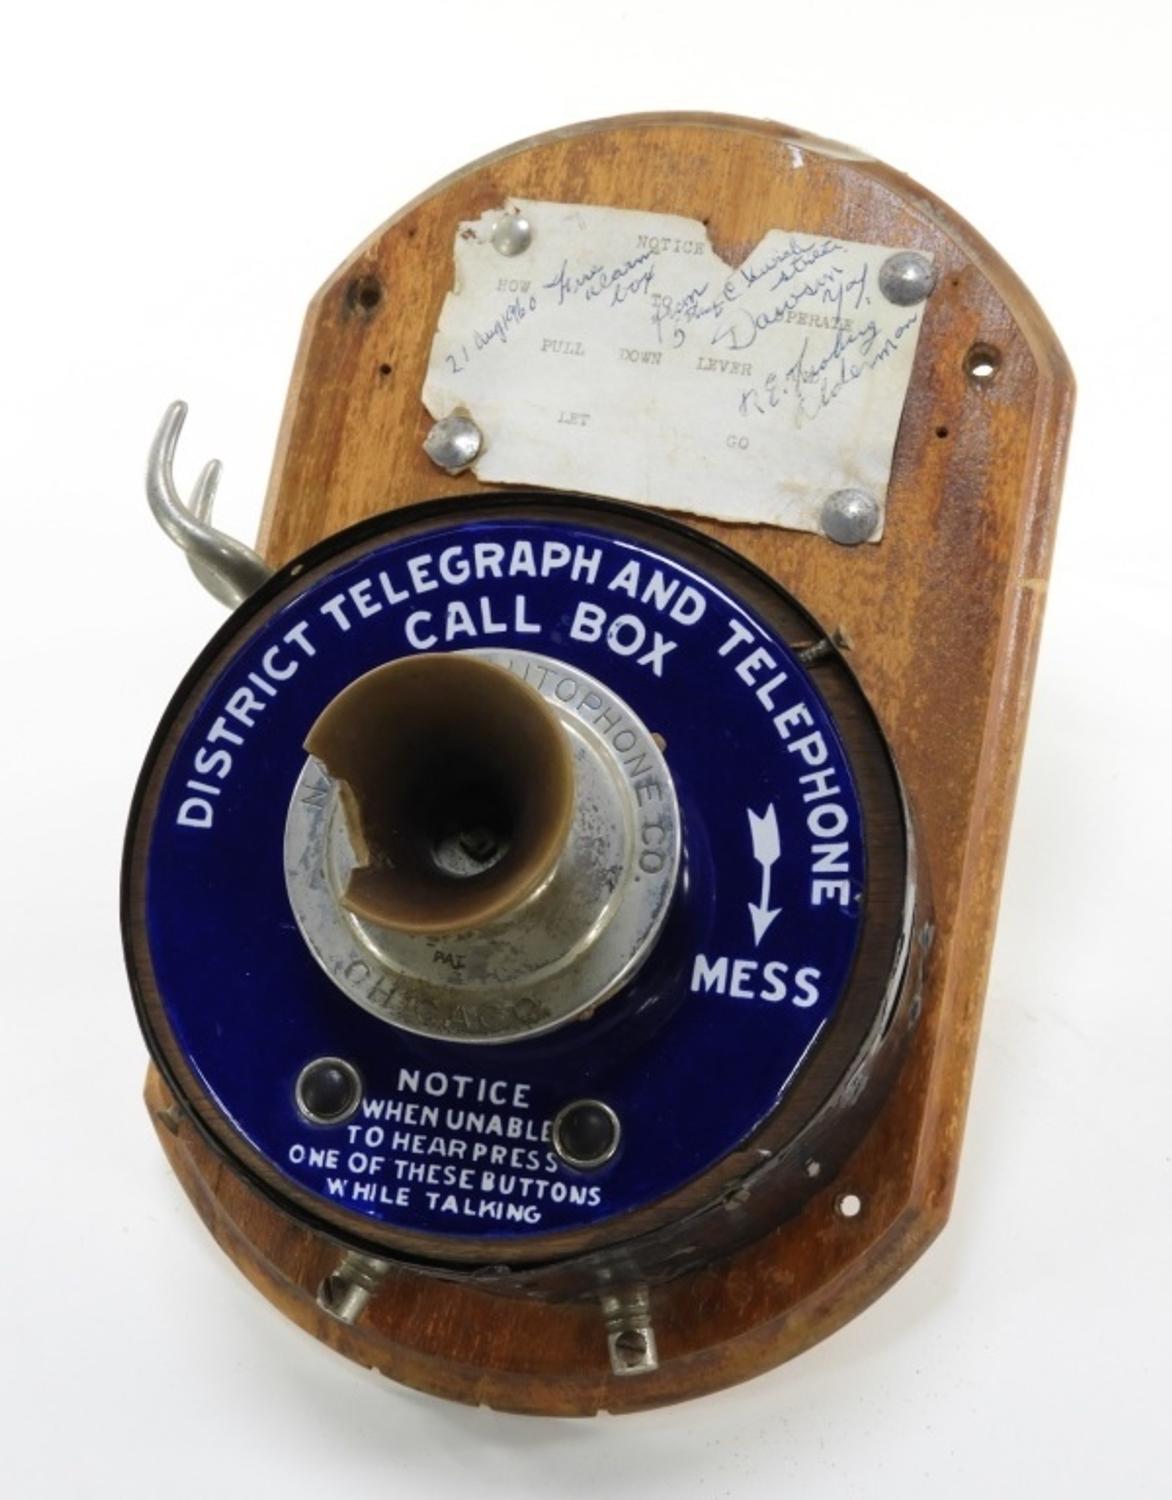 Historical telephones and related items from two Verizon museum chapters  will be auctioned August - Artwire Press Release from